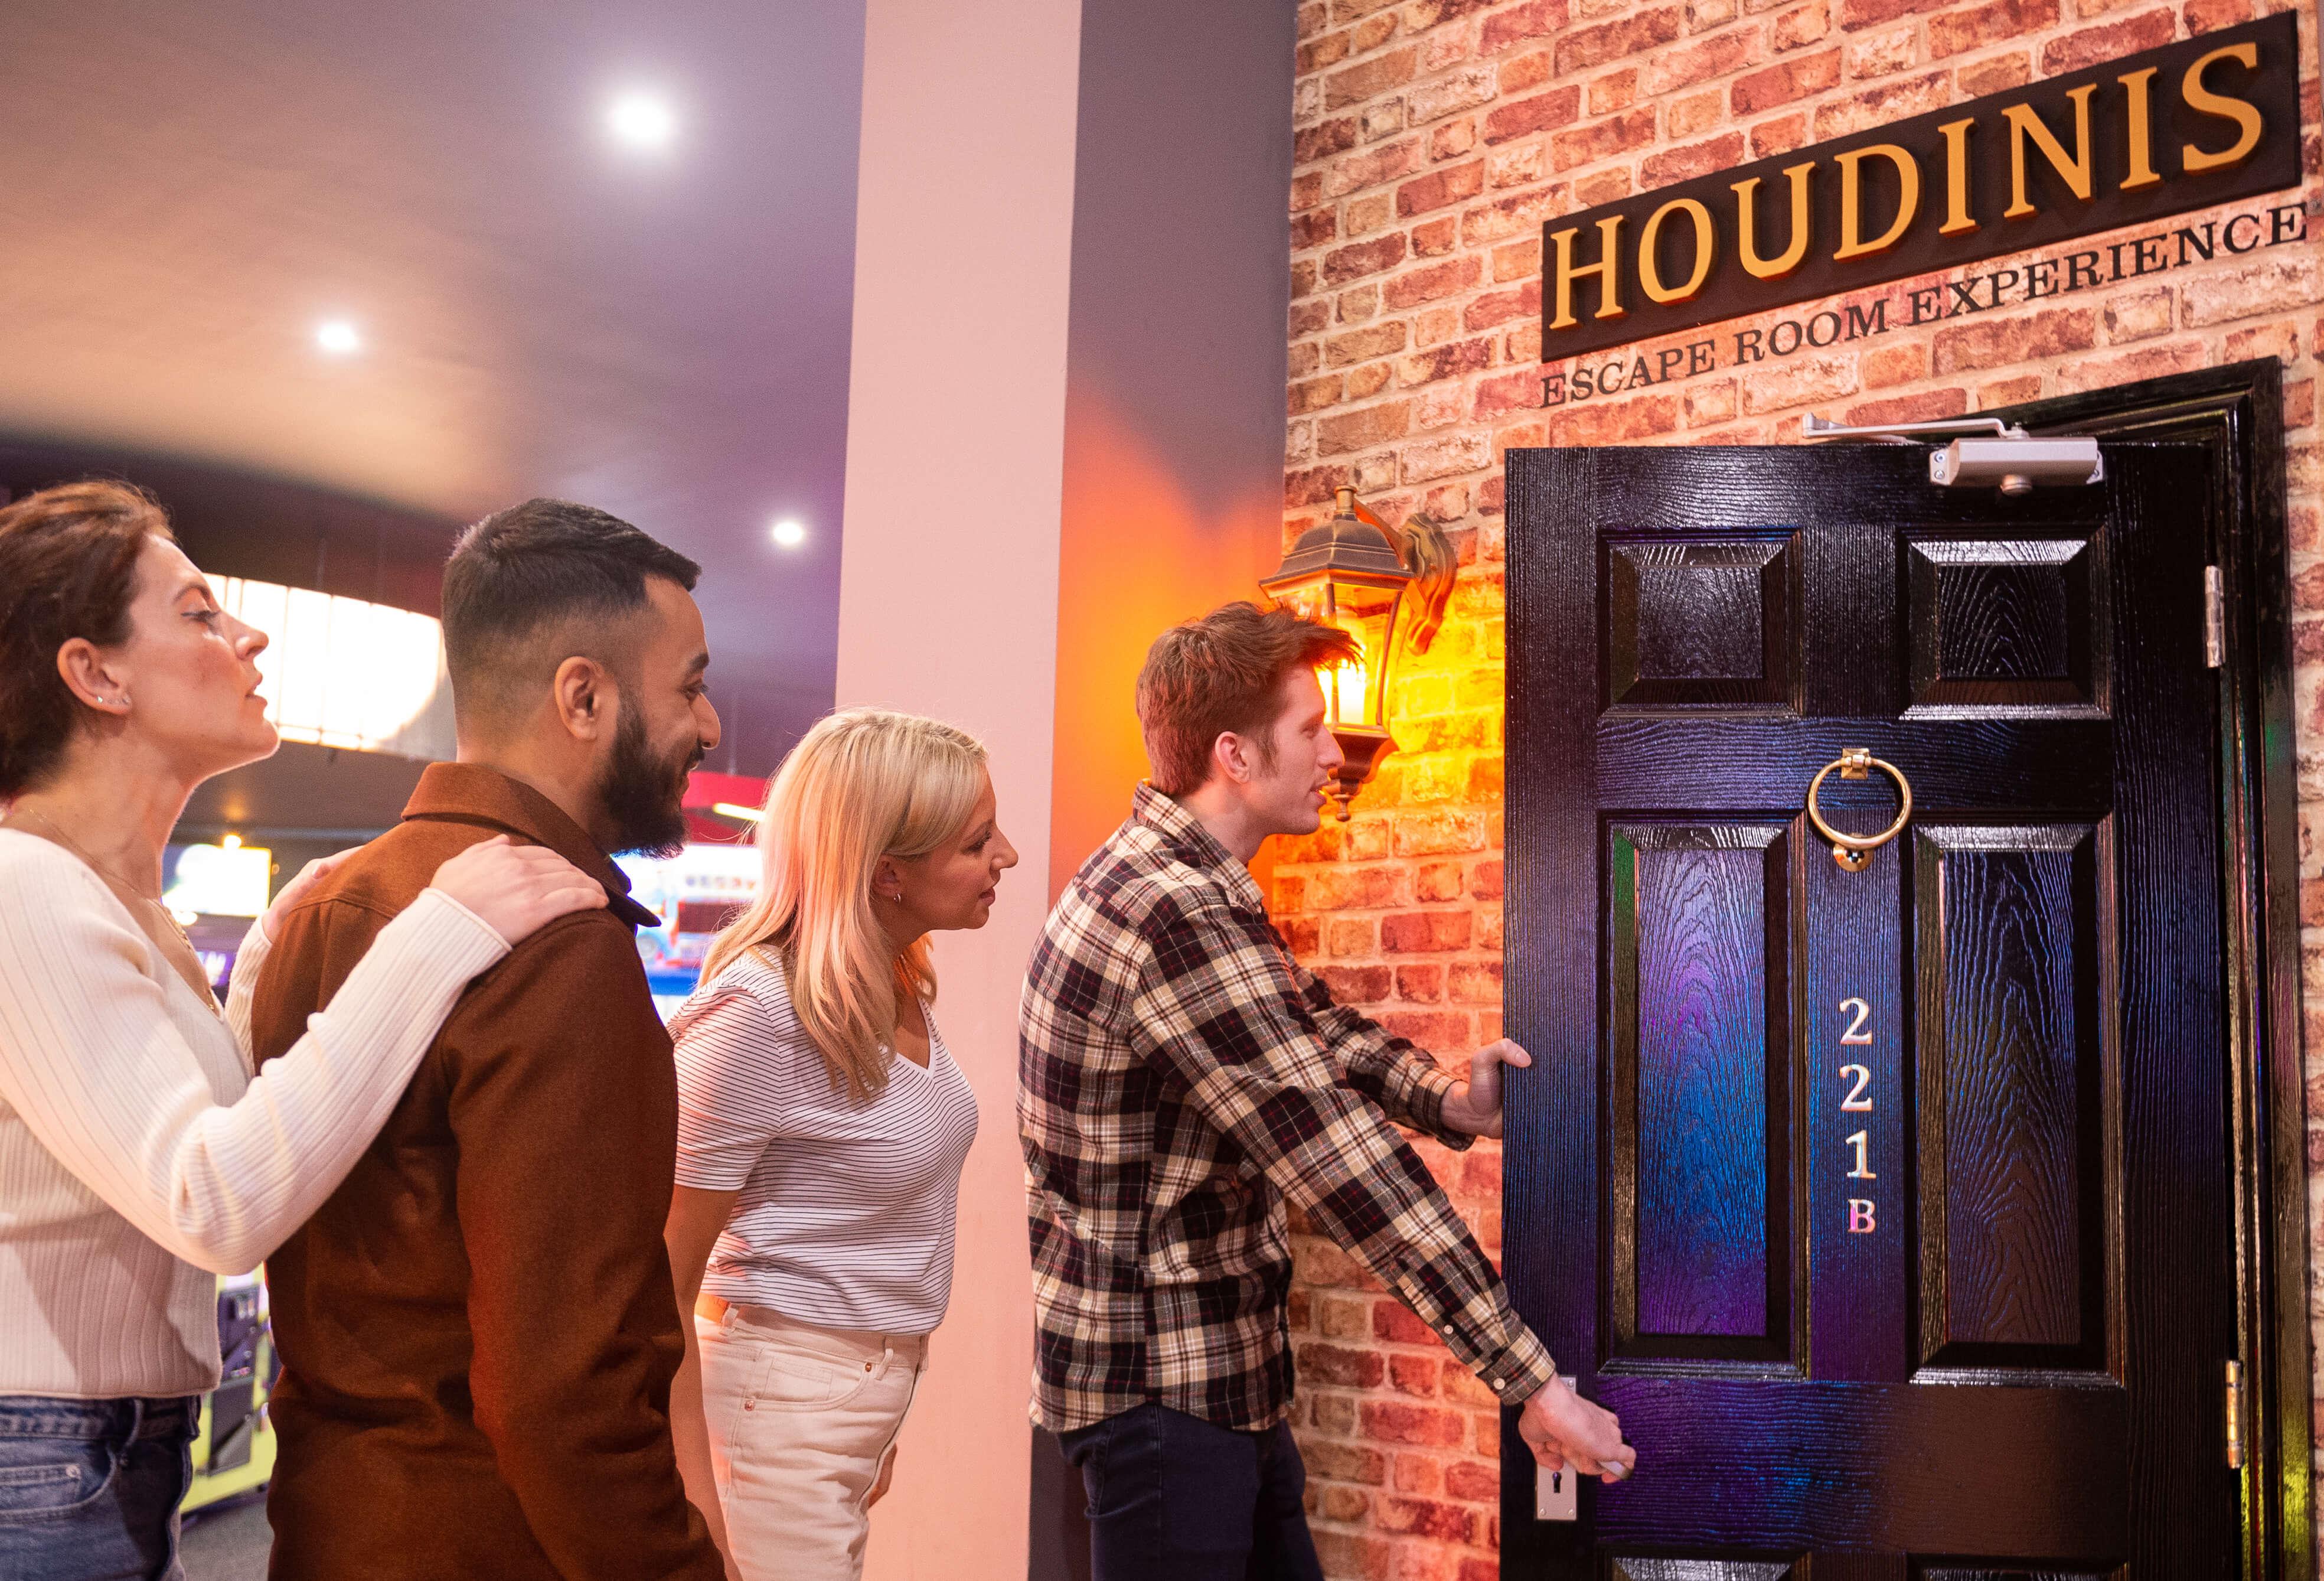 Friends Escape Rooms Houdinis Ealing